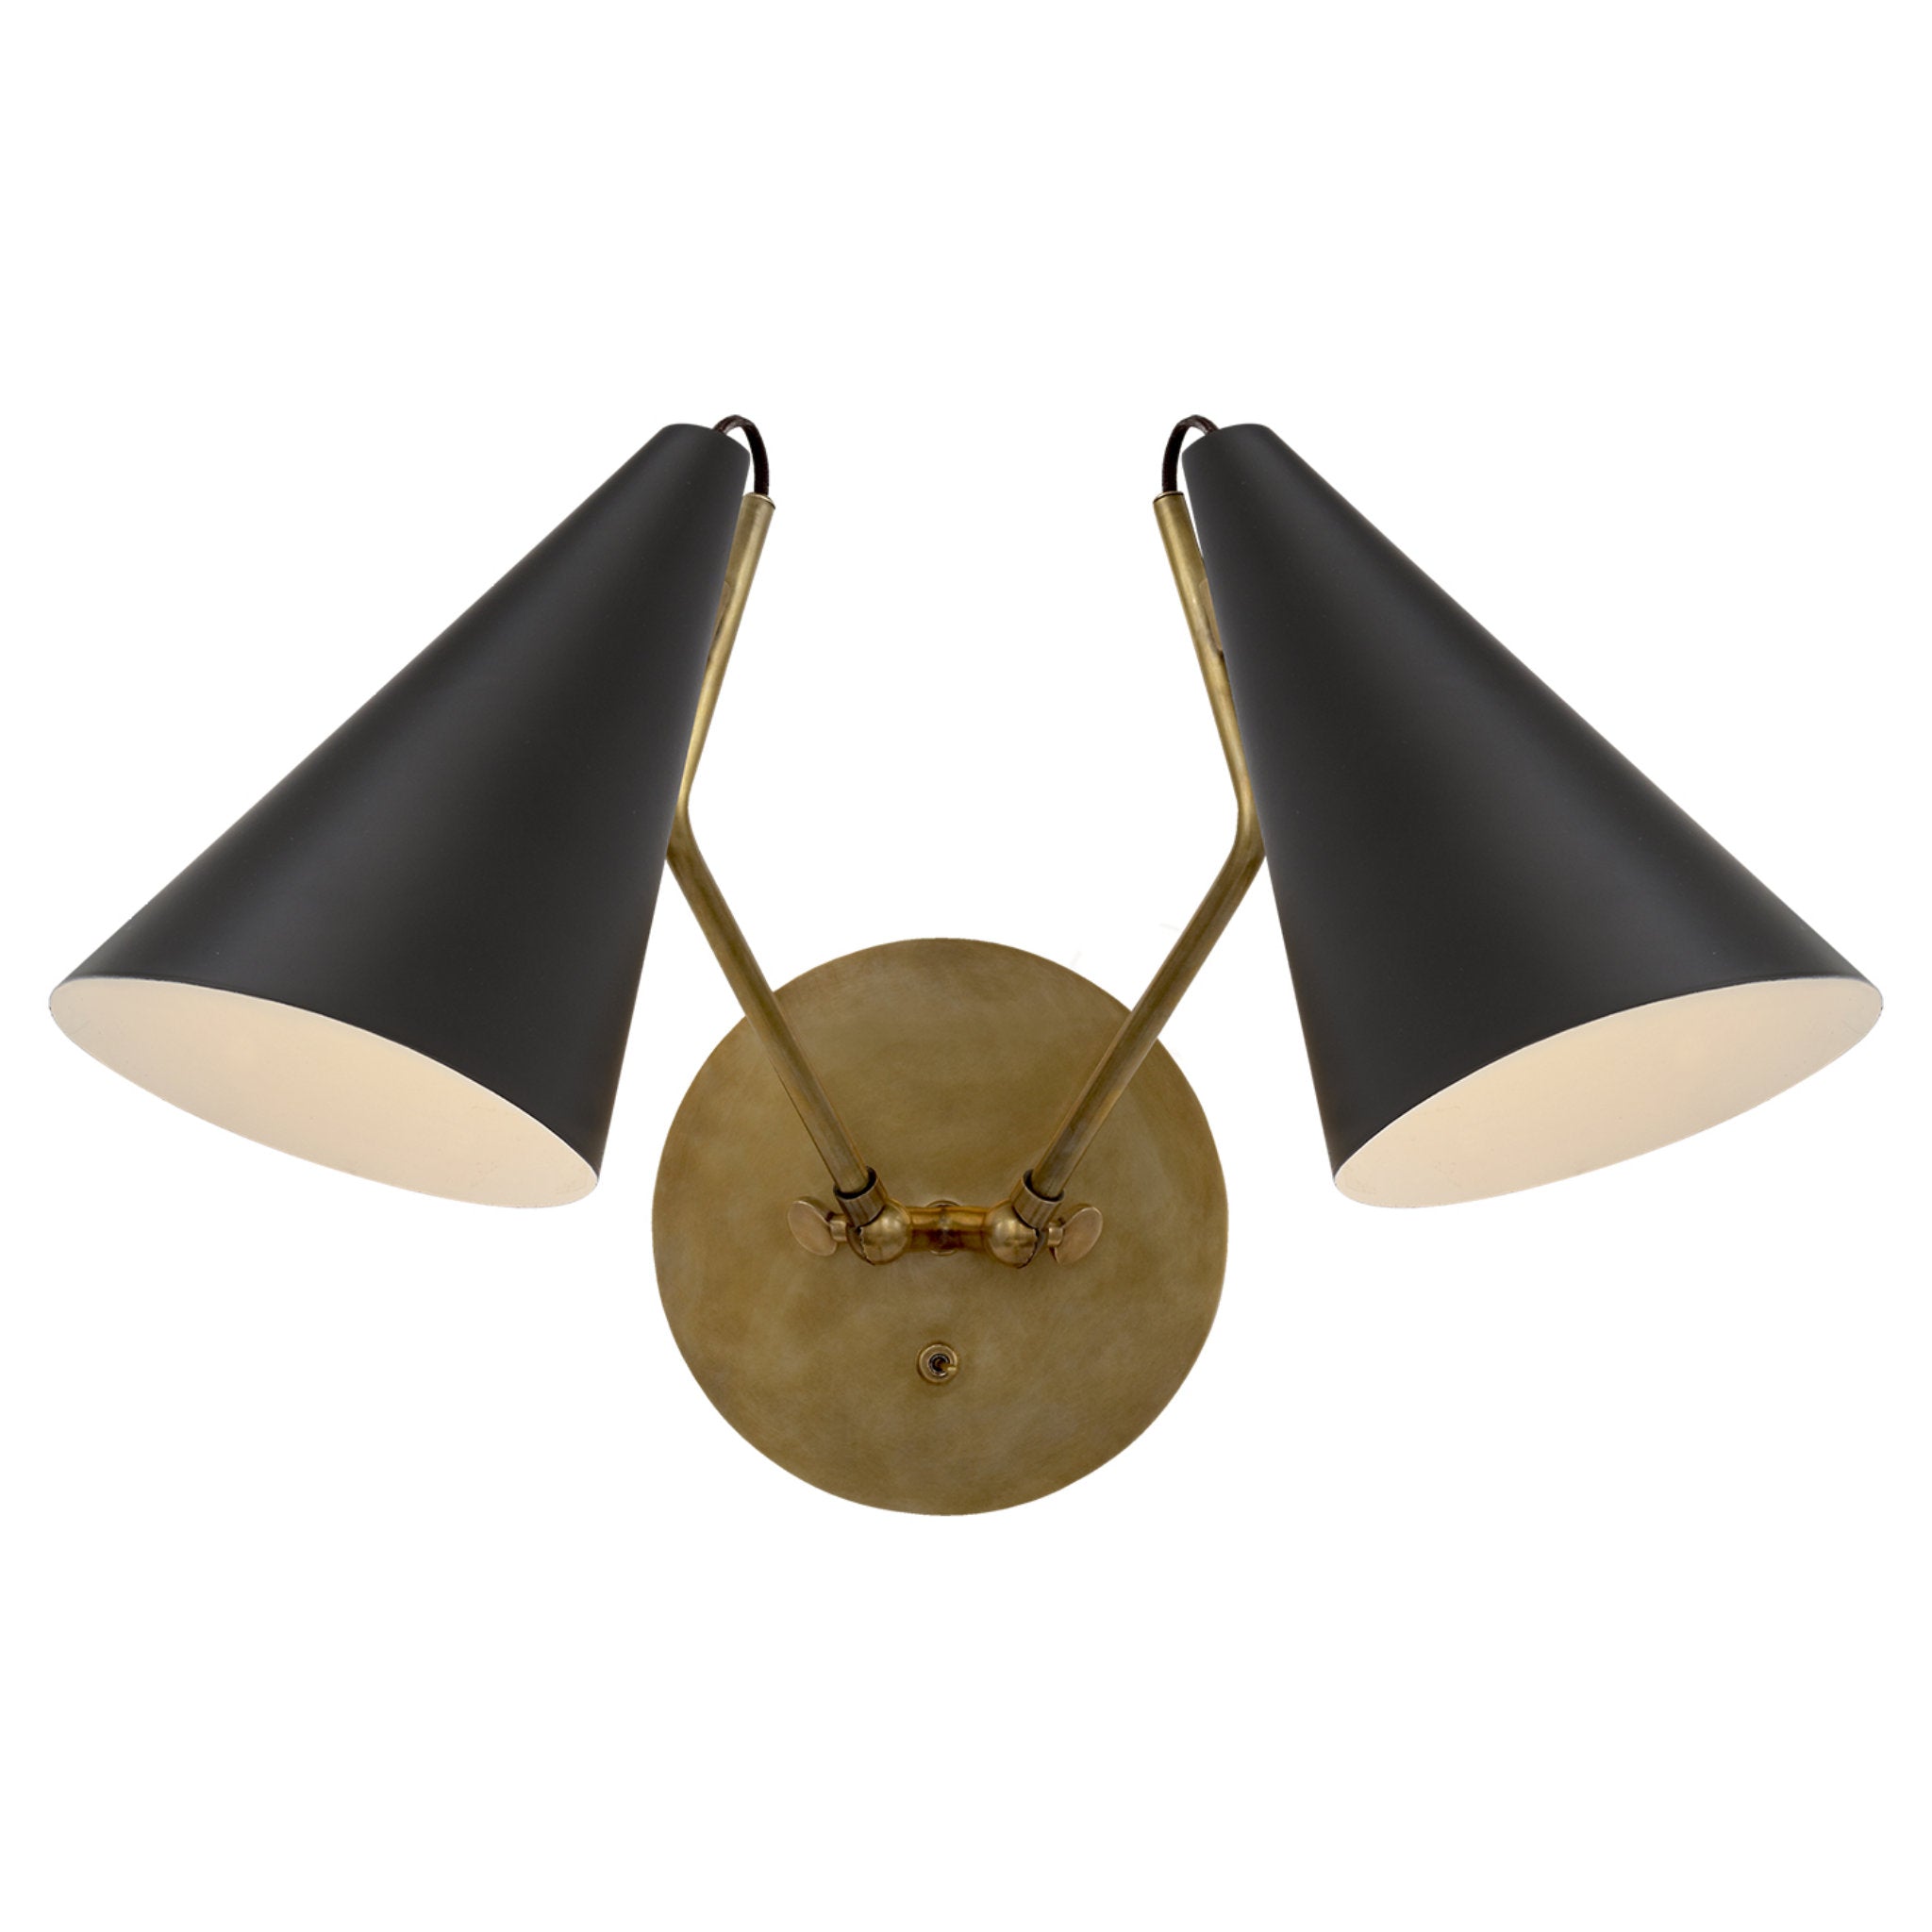 AERIN Clemente Double Sconce in Hand-Rubbed Antique Brass with Matte Black Shades